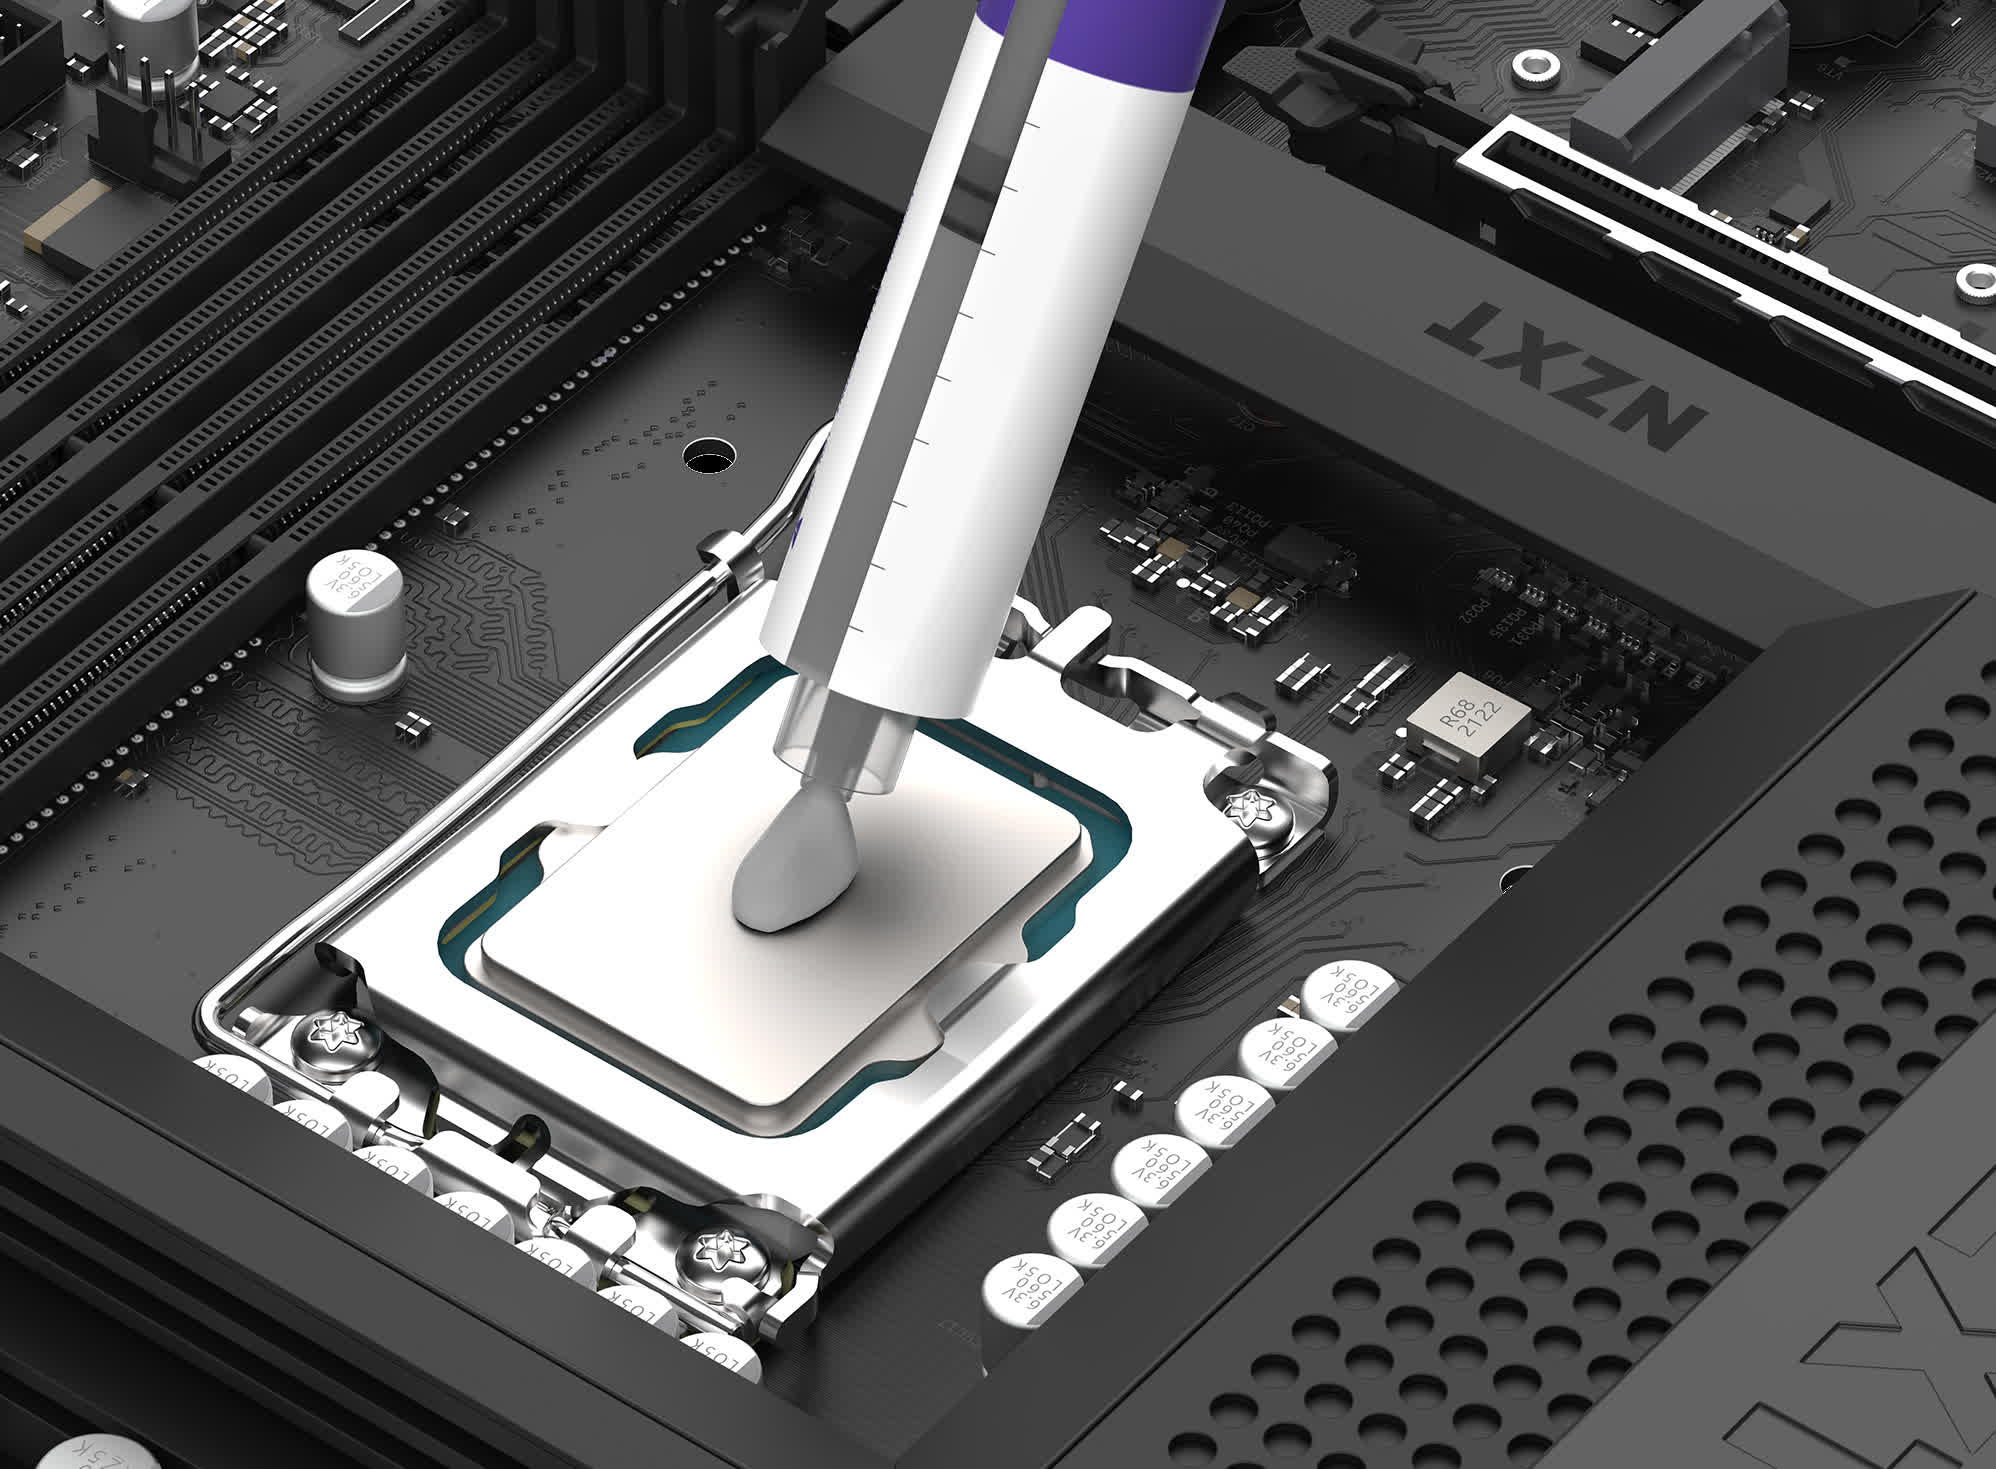 NZXT launches high-performance, non-conductive thermal paste